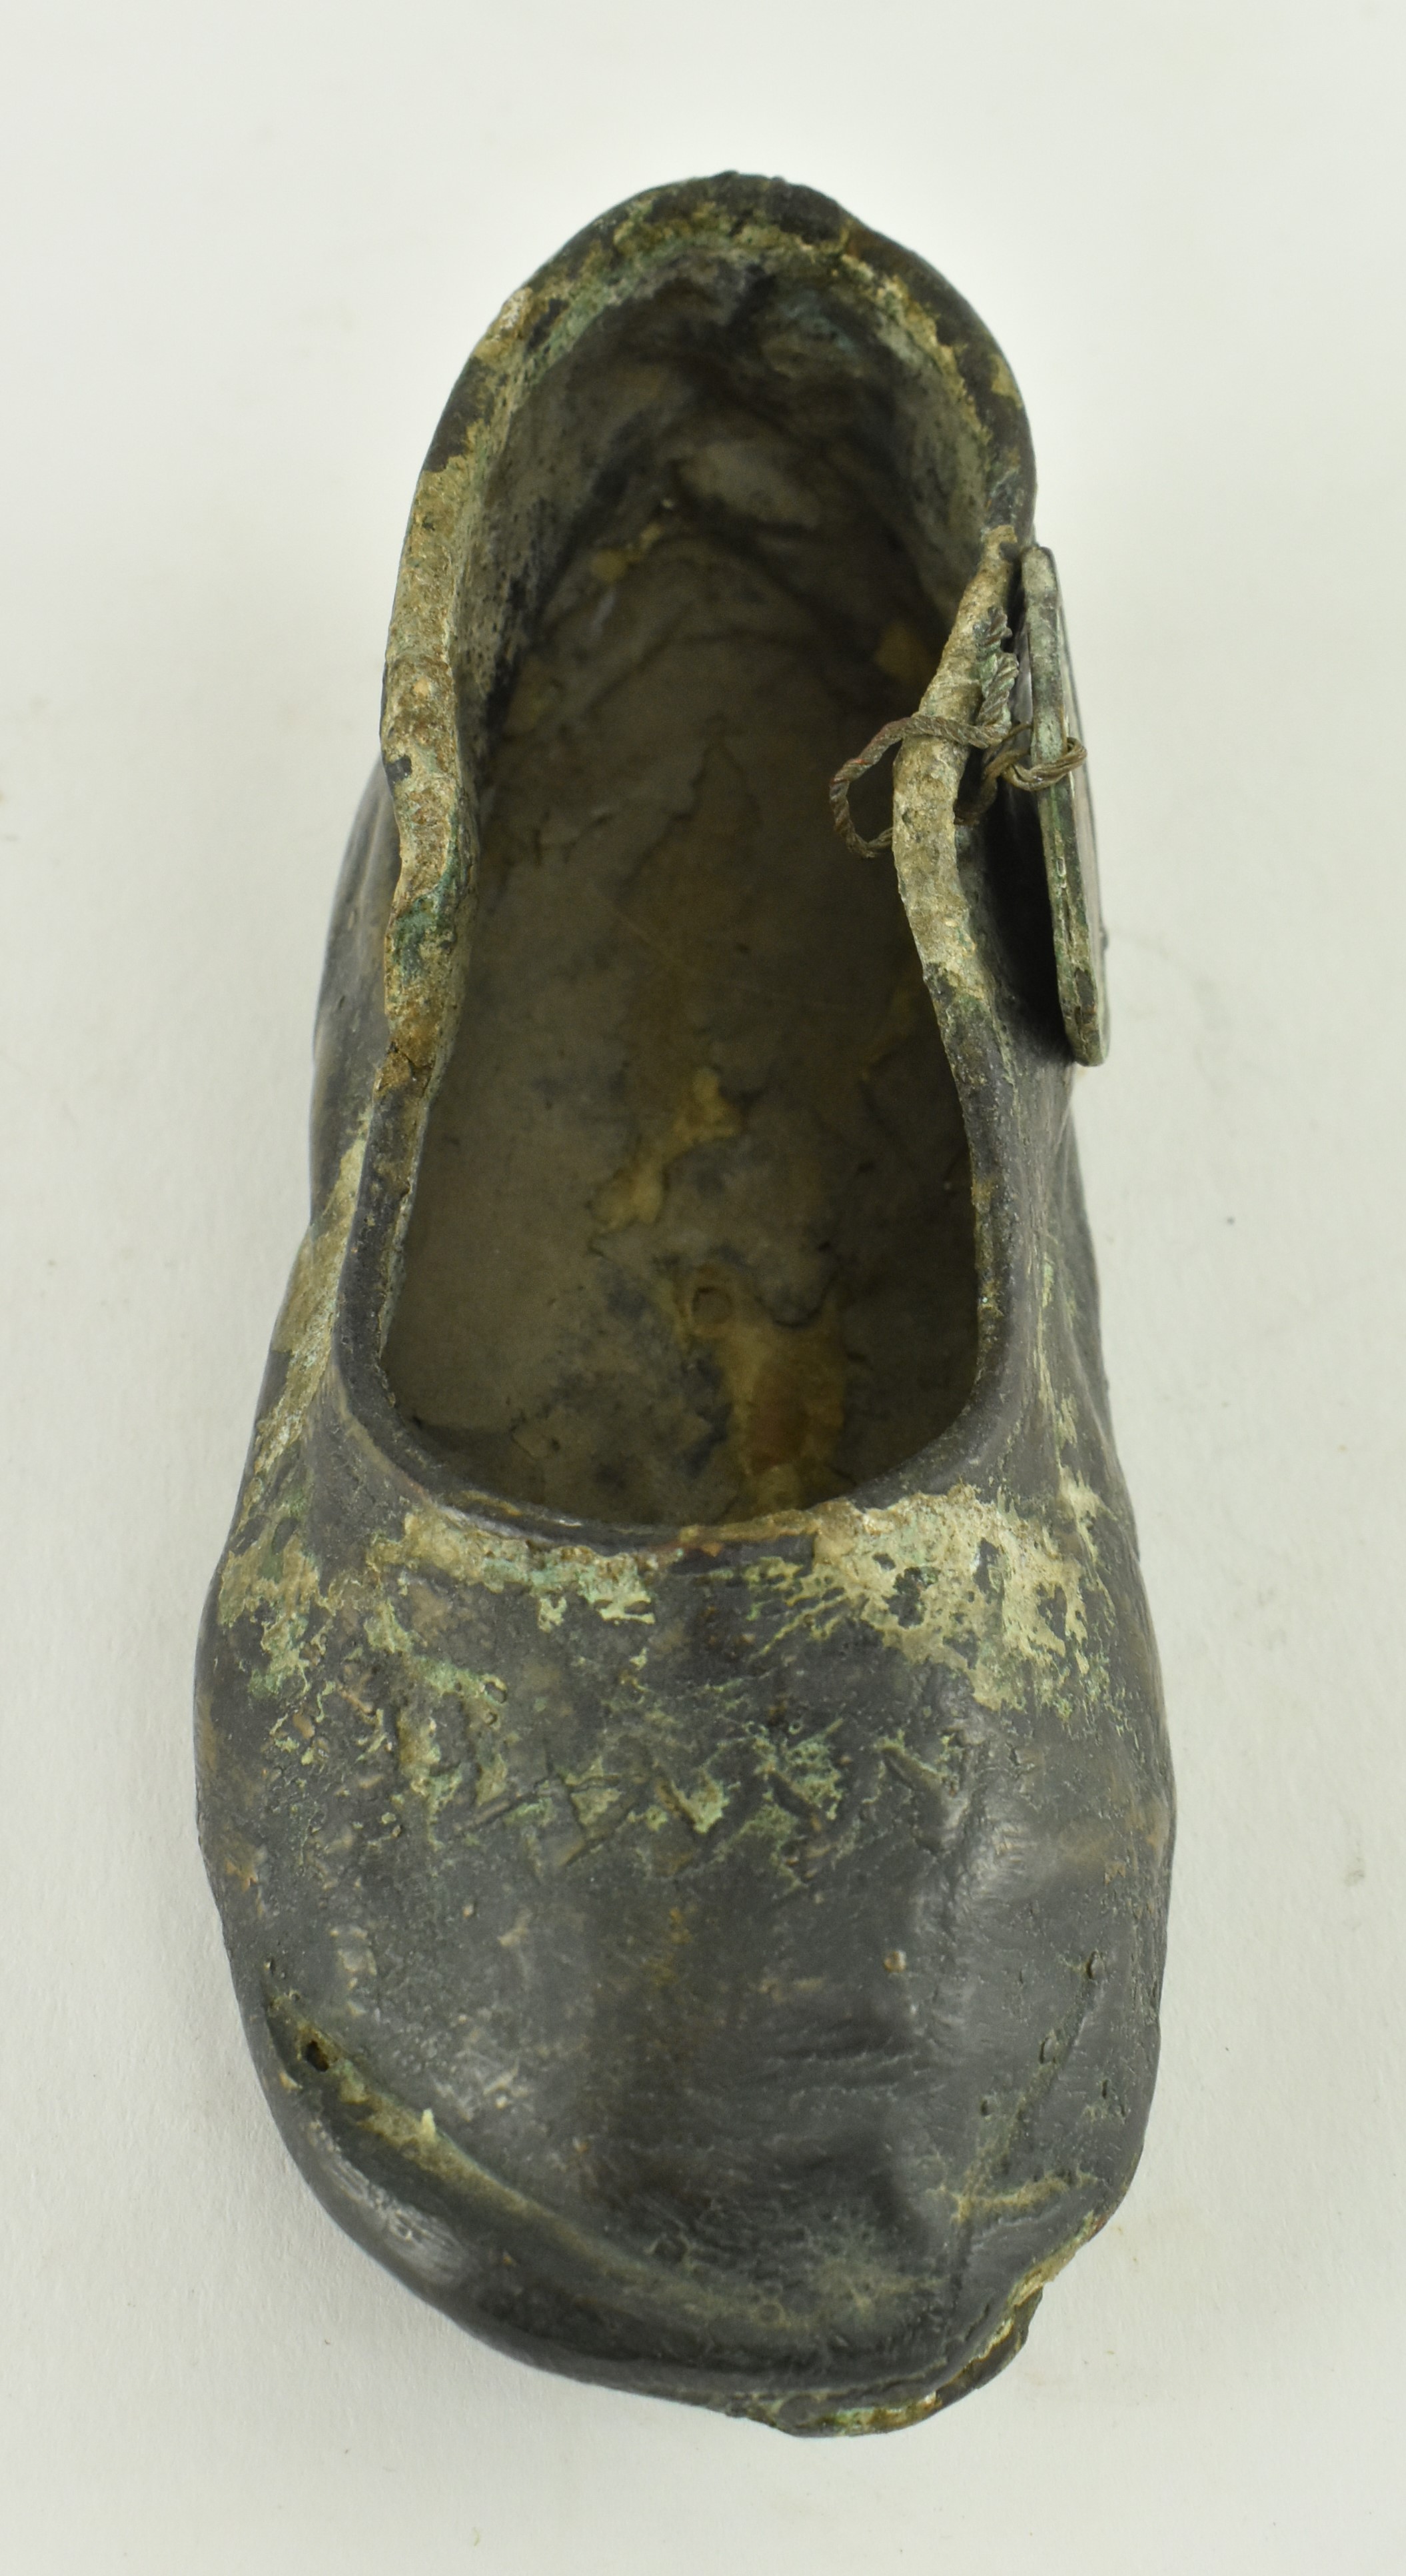 EARLY 20TH CENTURY GERMAN CAST BRONZE CHILD'S SHOE - Image 3 of 7